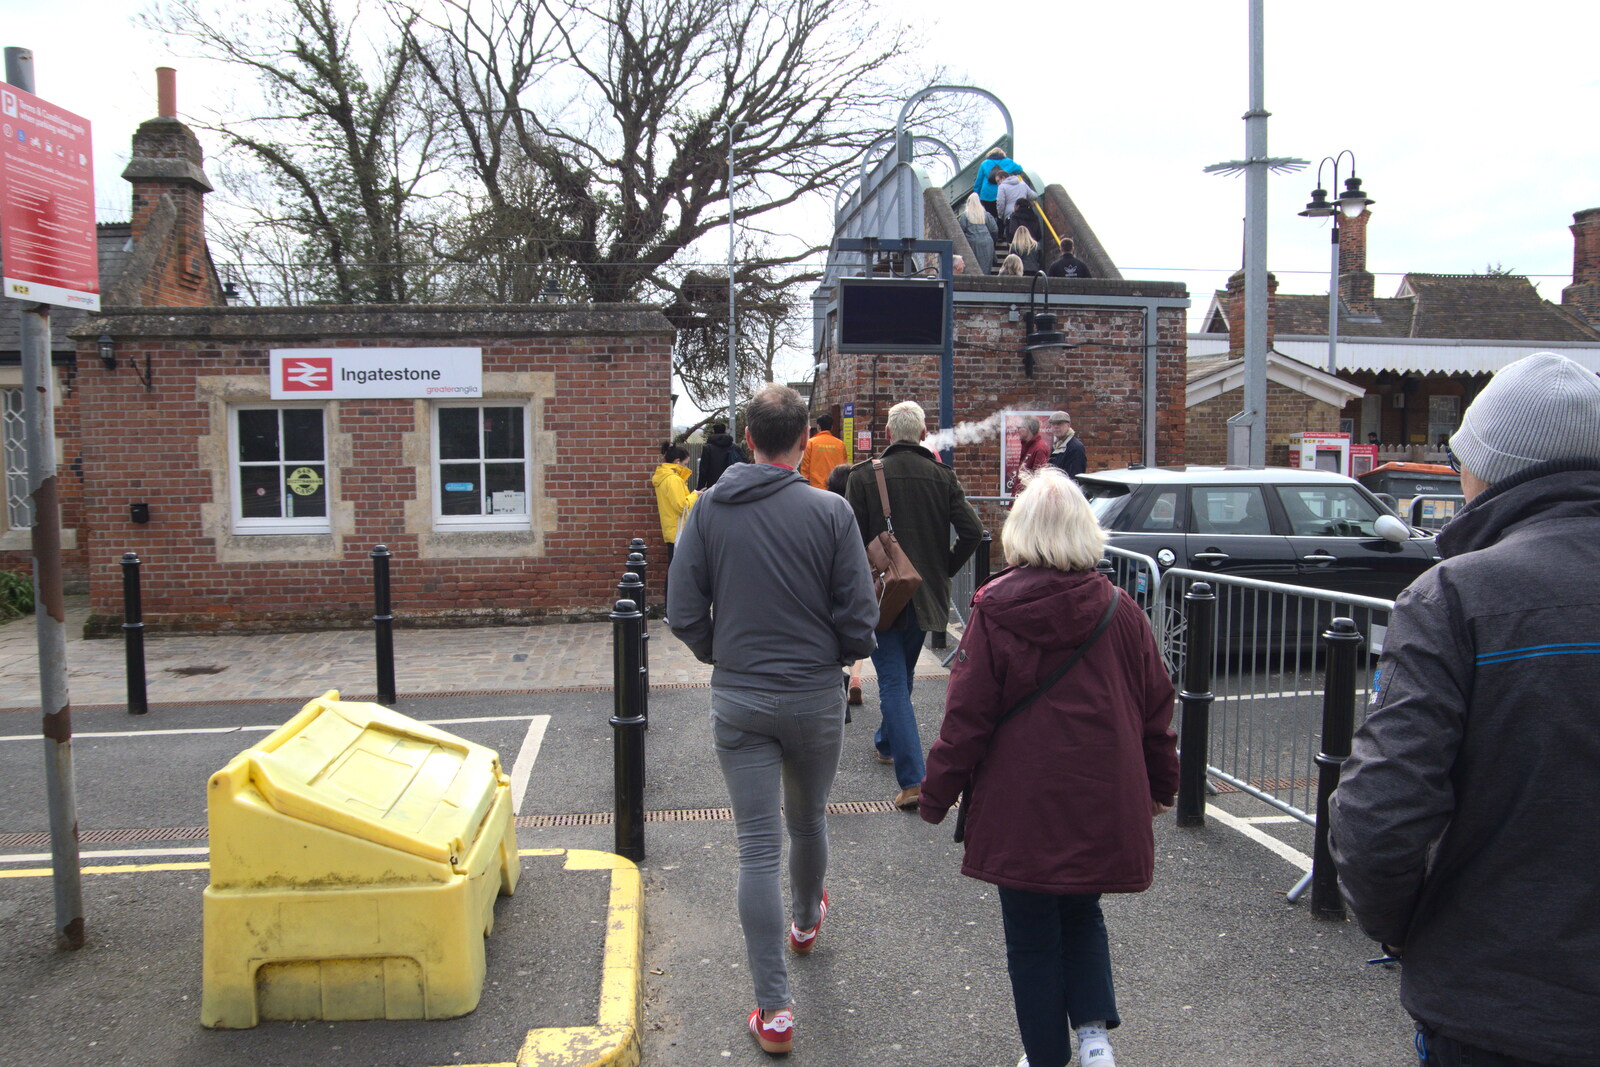 The bus-replacement crowds pile into Ingatestone from A Day in New Milton, Hampshire - 3rd April 2023